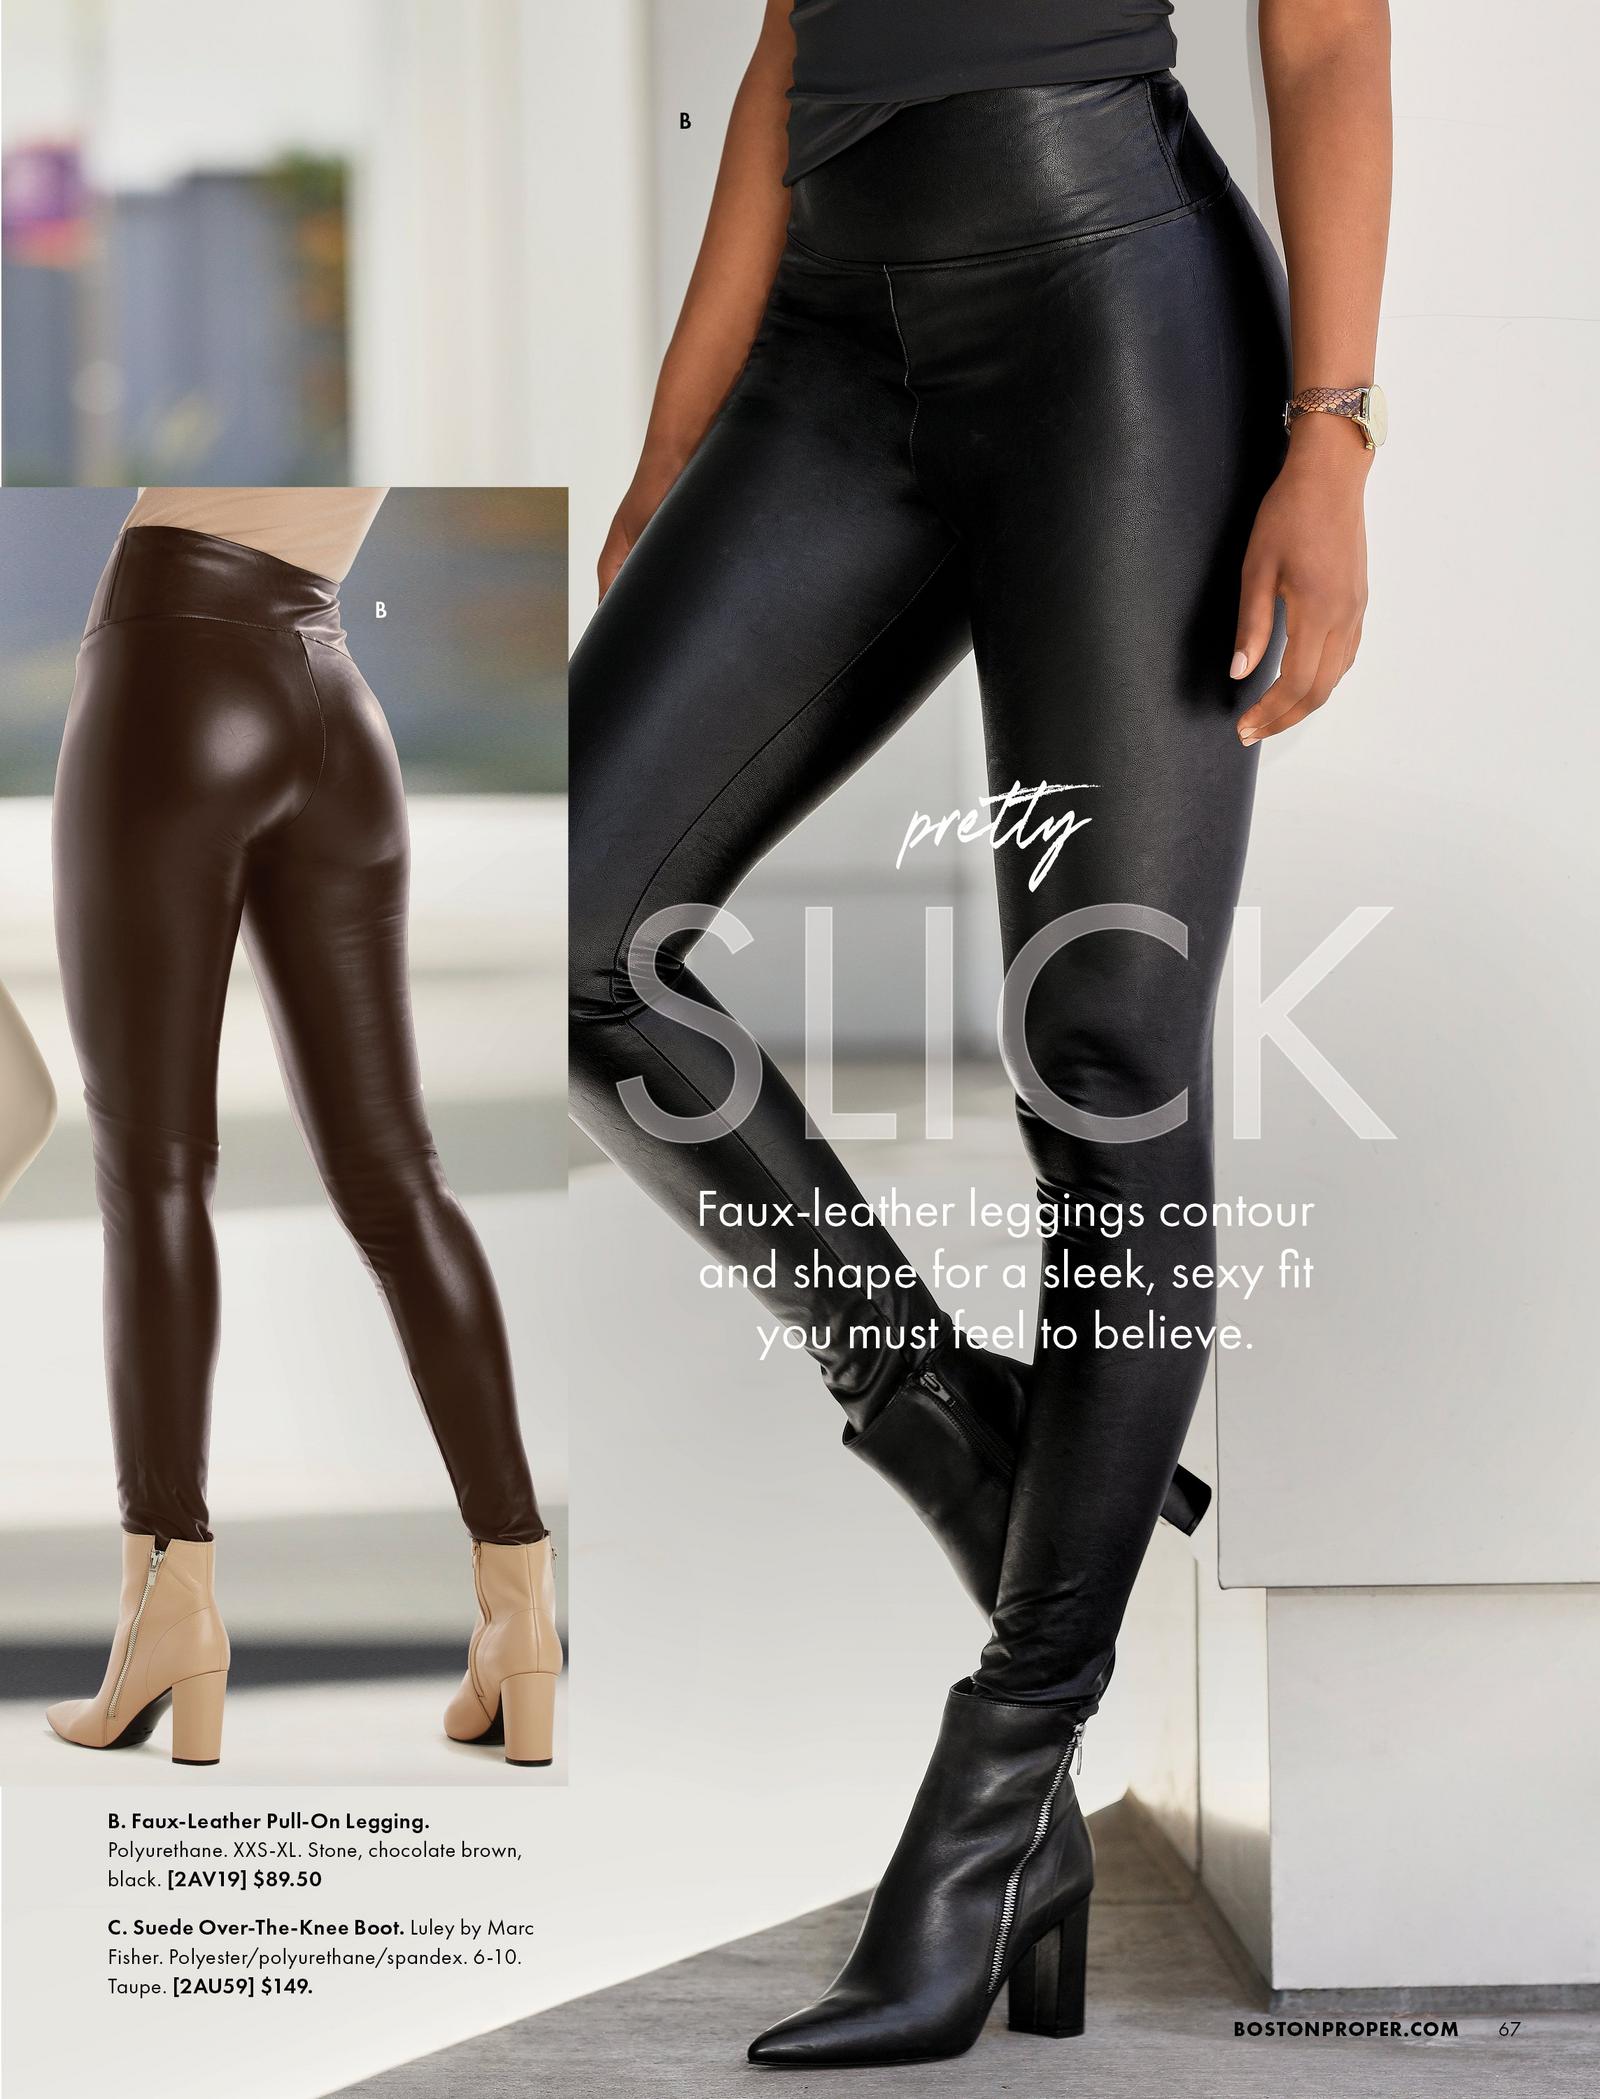 left model wearing brown faux-leather leggings and tan leather booties. right model wearing black faux-leather leggings and black leather booties.